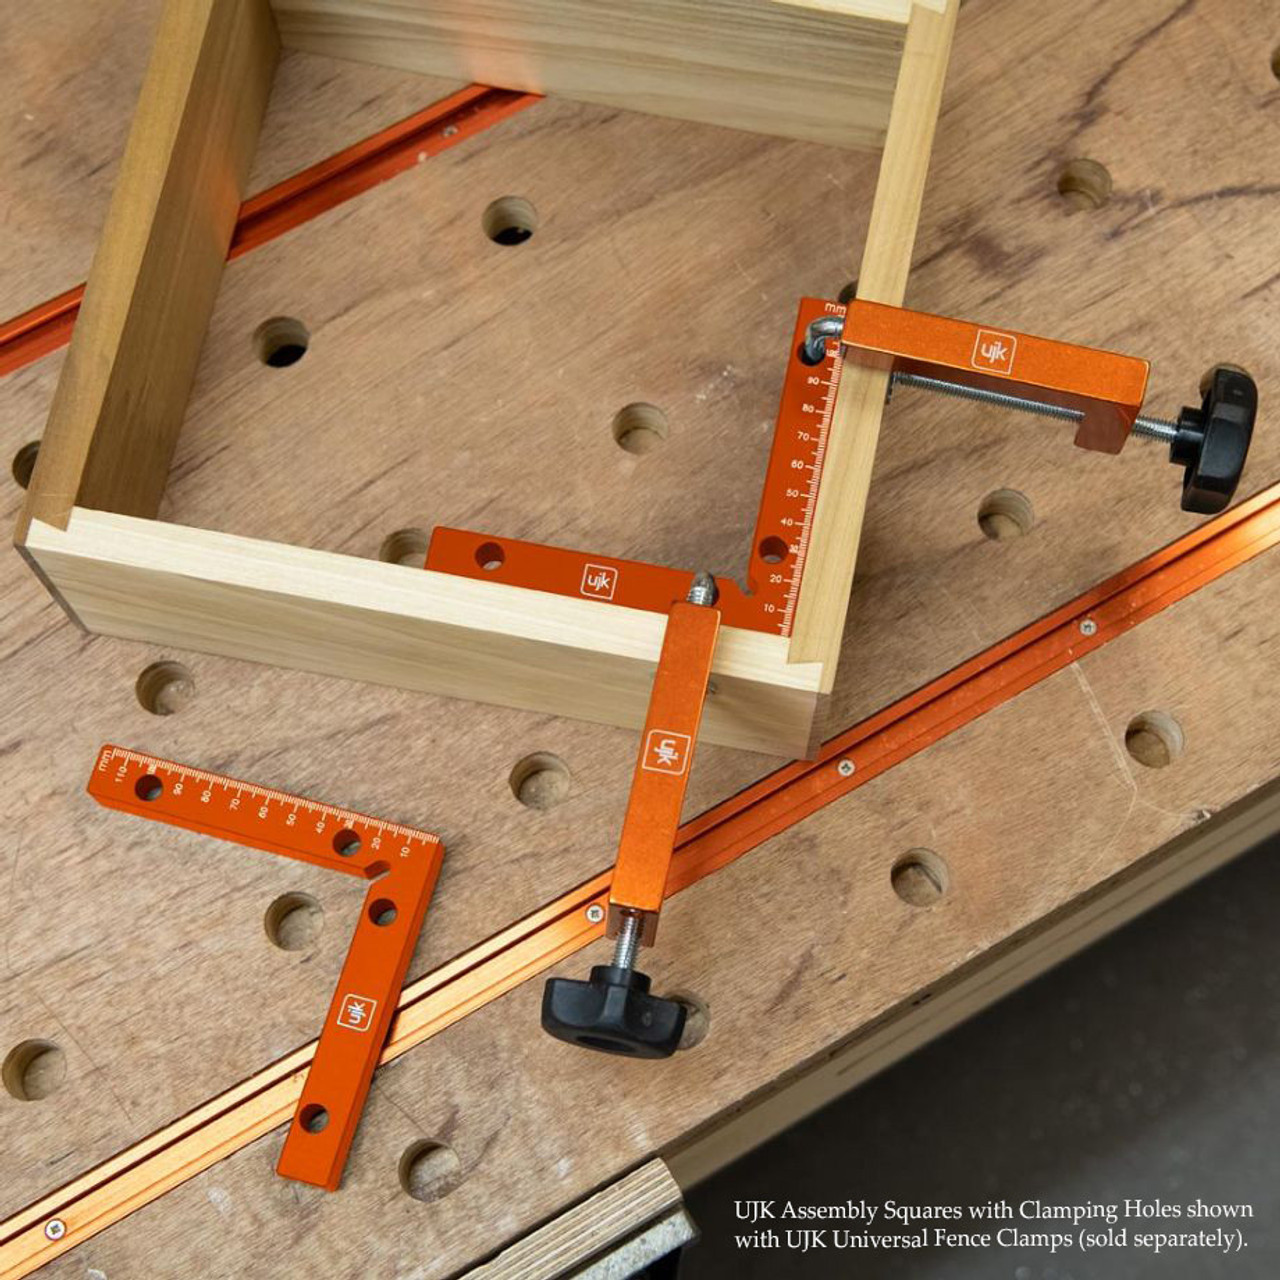 UJK Assembly Squares with Clamping Holes